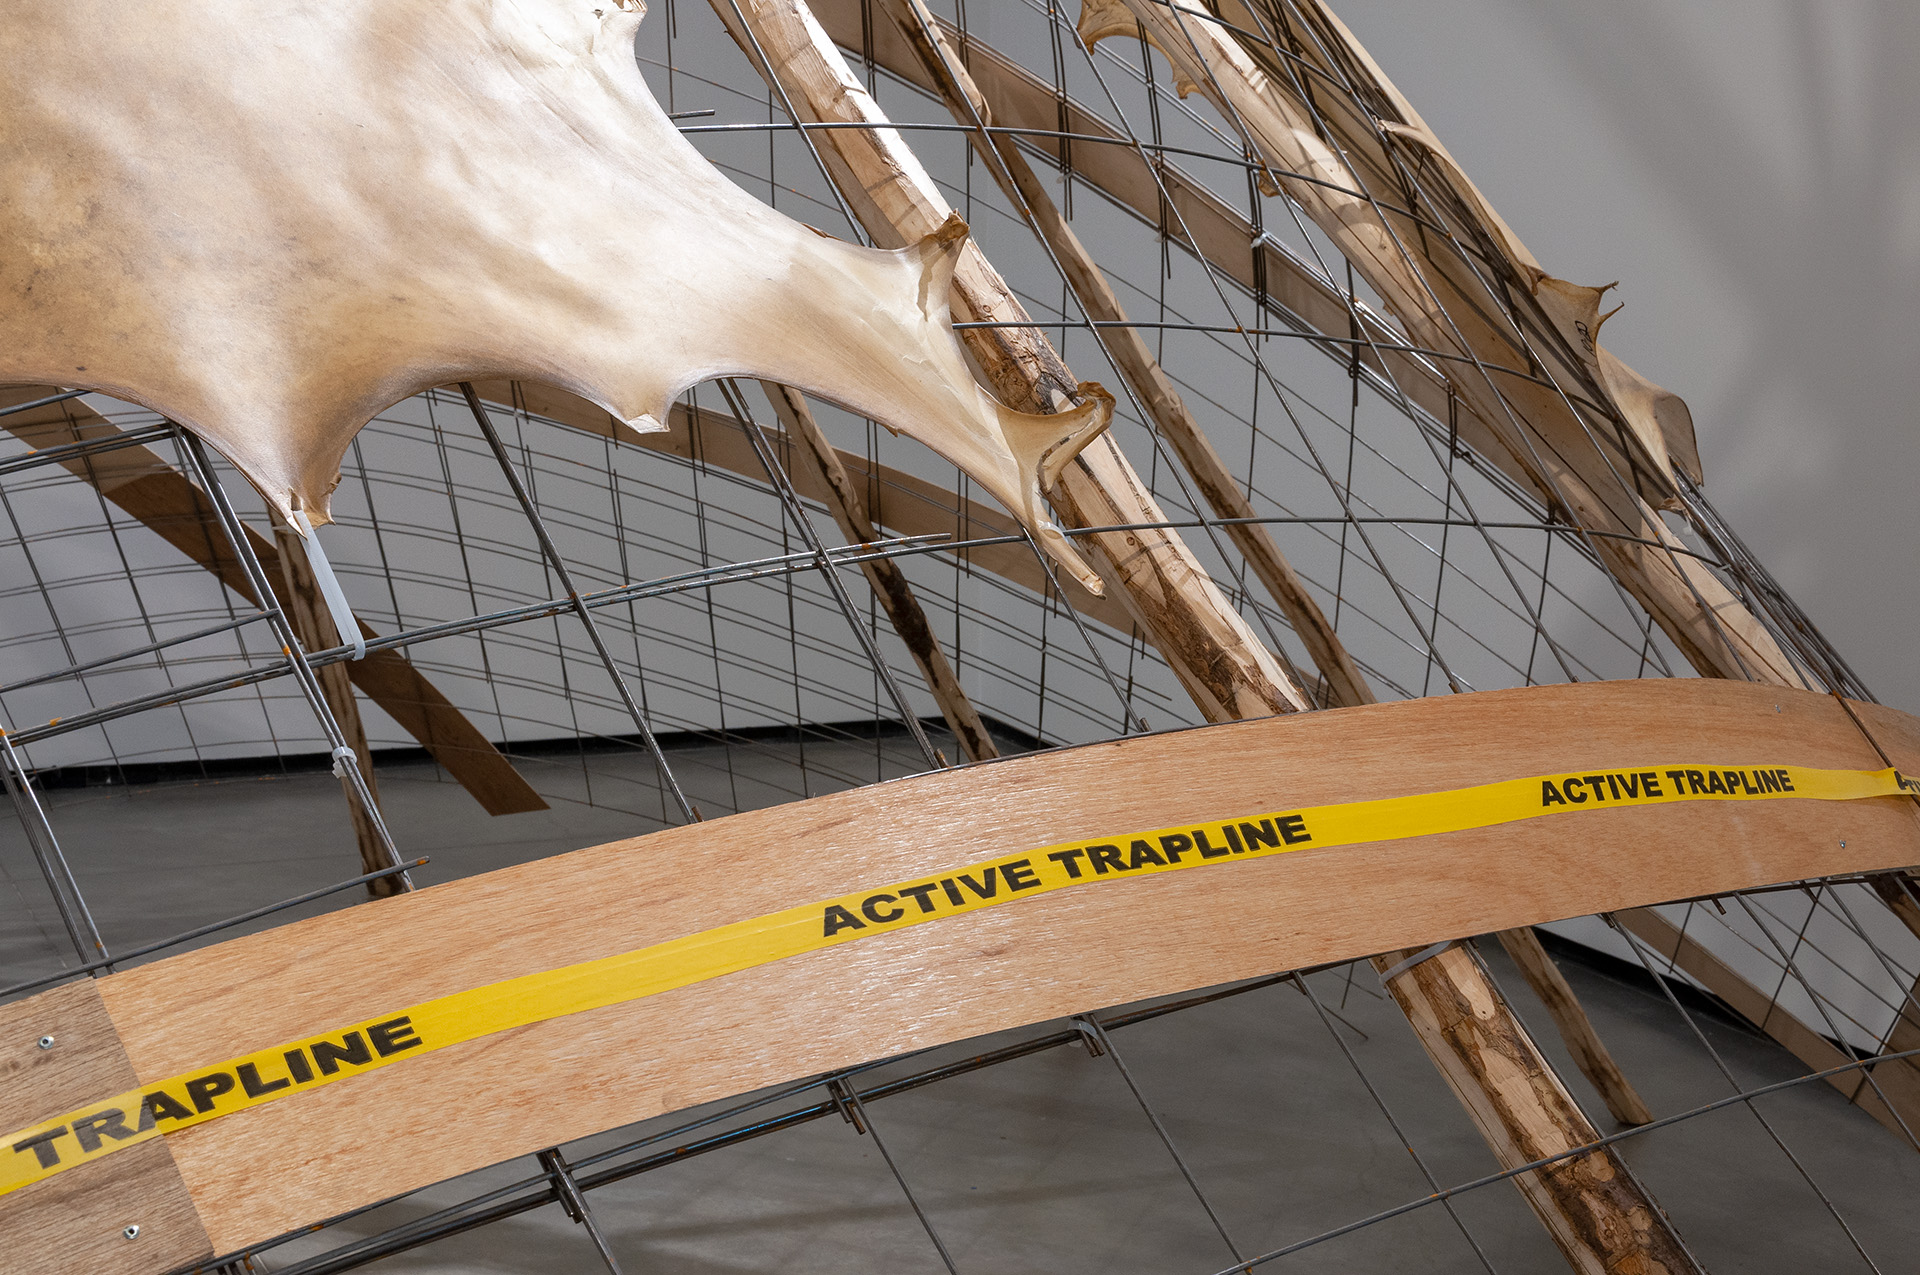 Detail of a wire mesh structure with animal hide and wood with the text “Active Trapline” across it